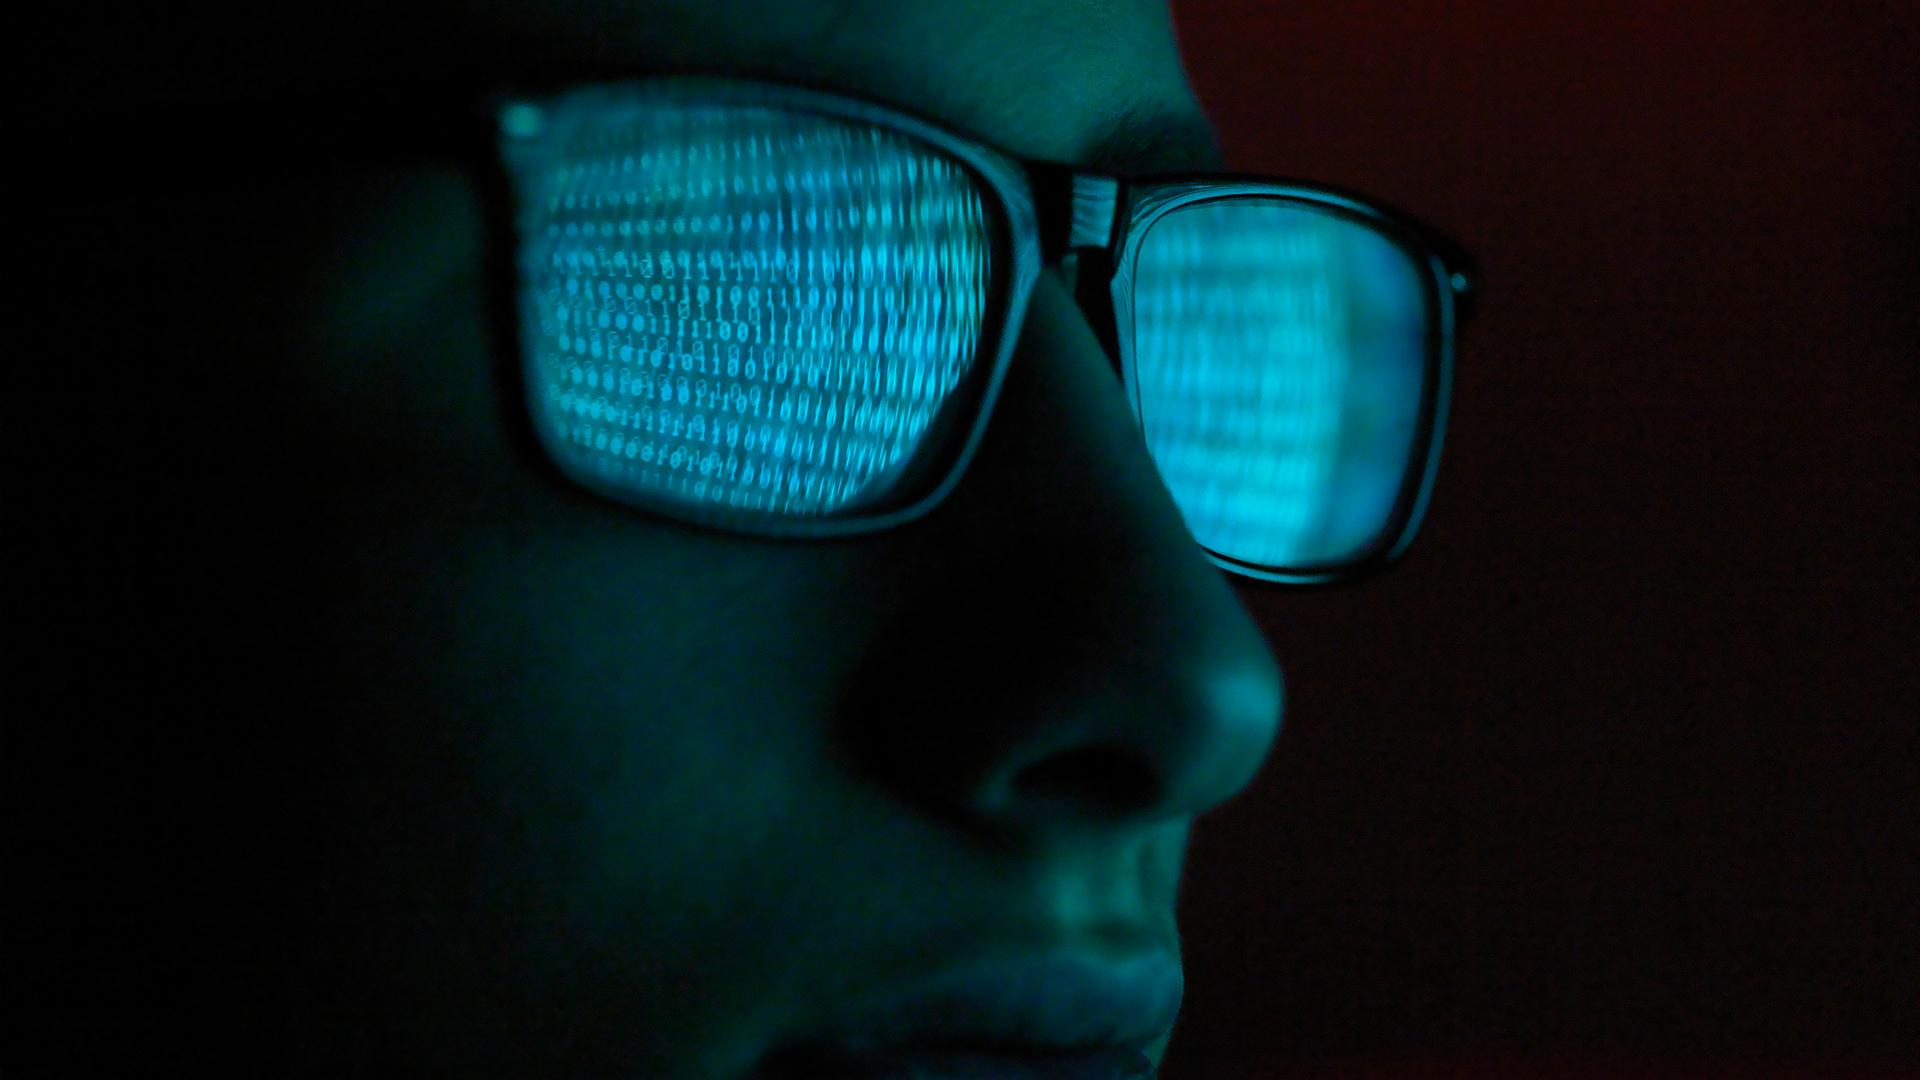 Binary code reflected in a hacker's glasses.